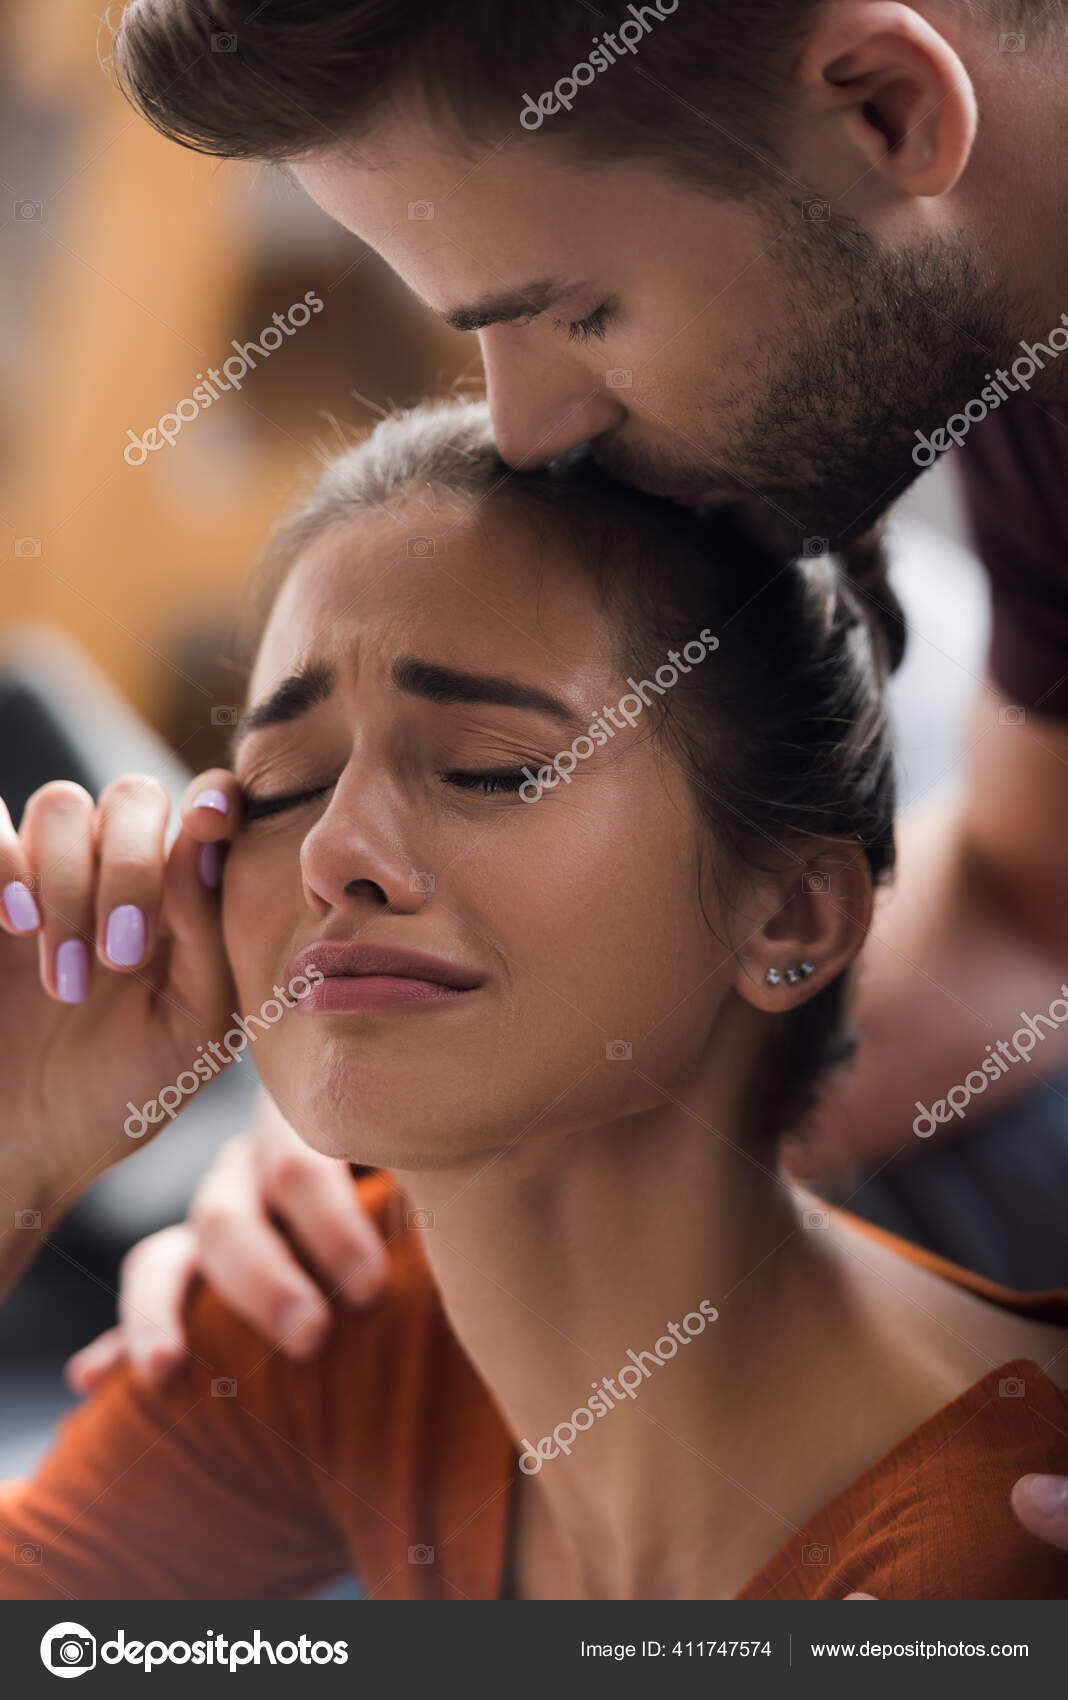 Girl Crying Next to a Kissing Couple